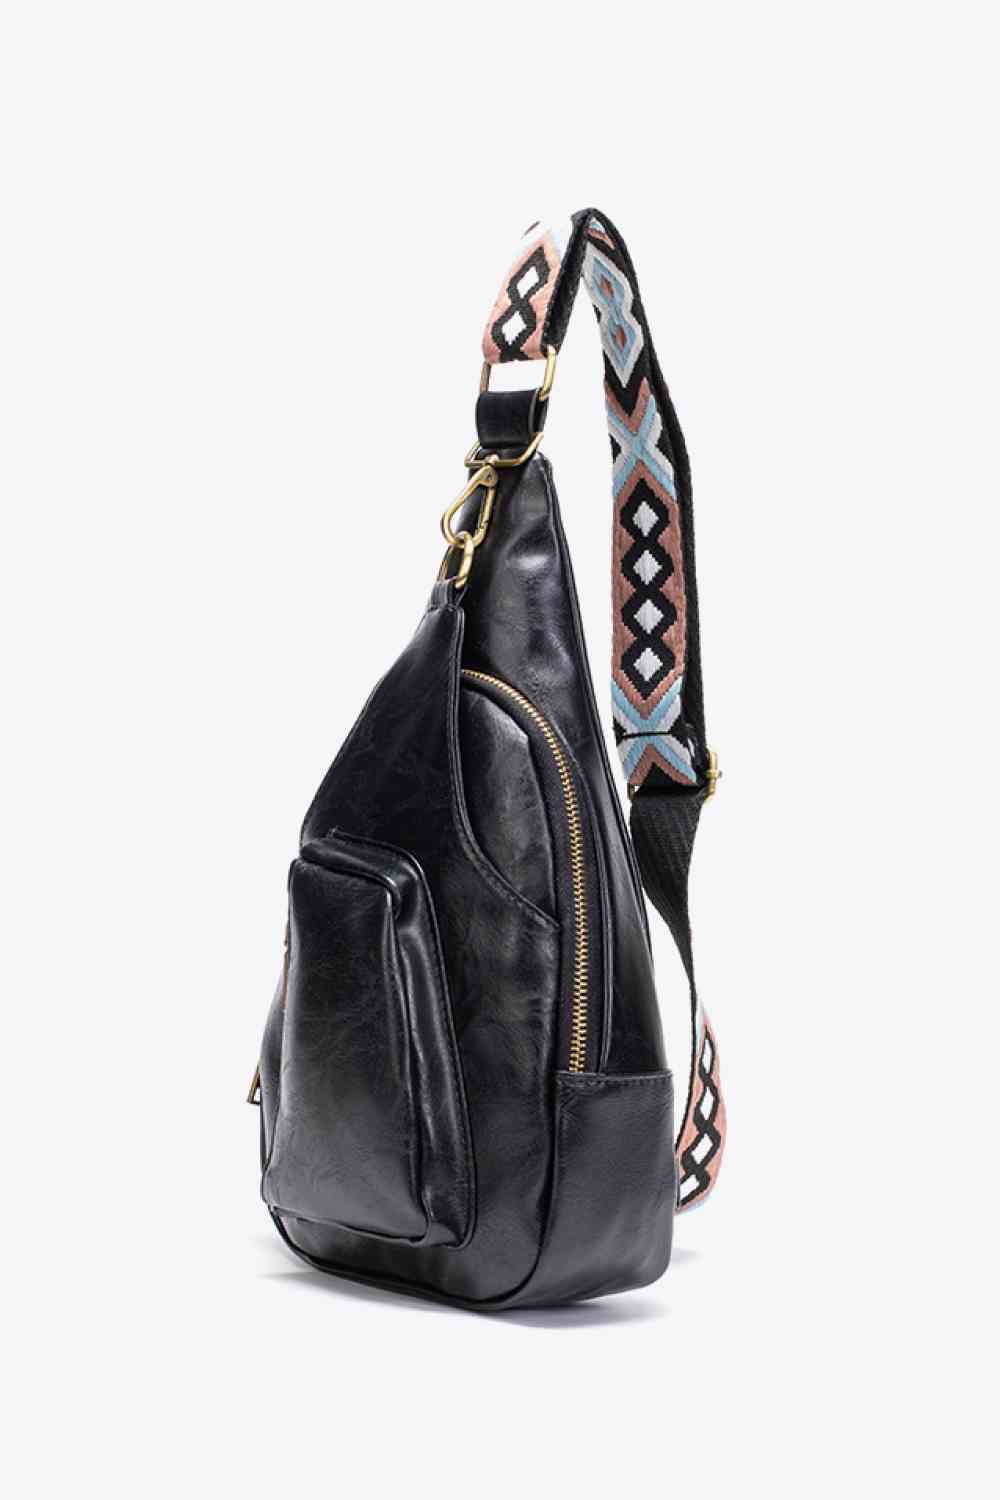 All The Feels PU Leather Sling Bag - ChicaLux